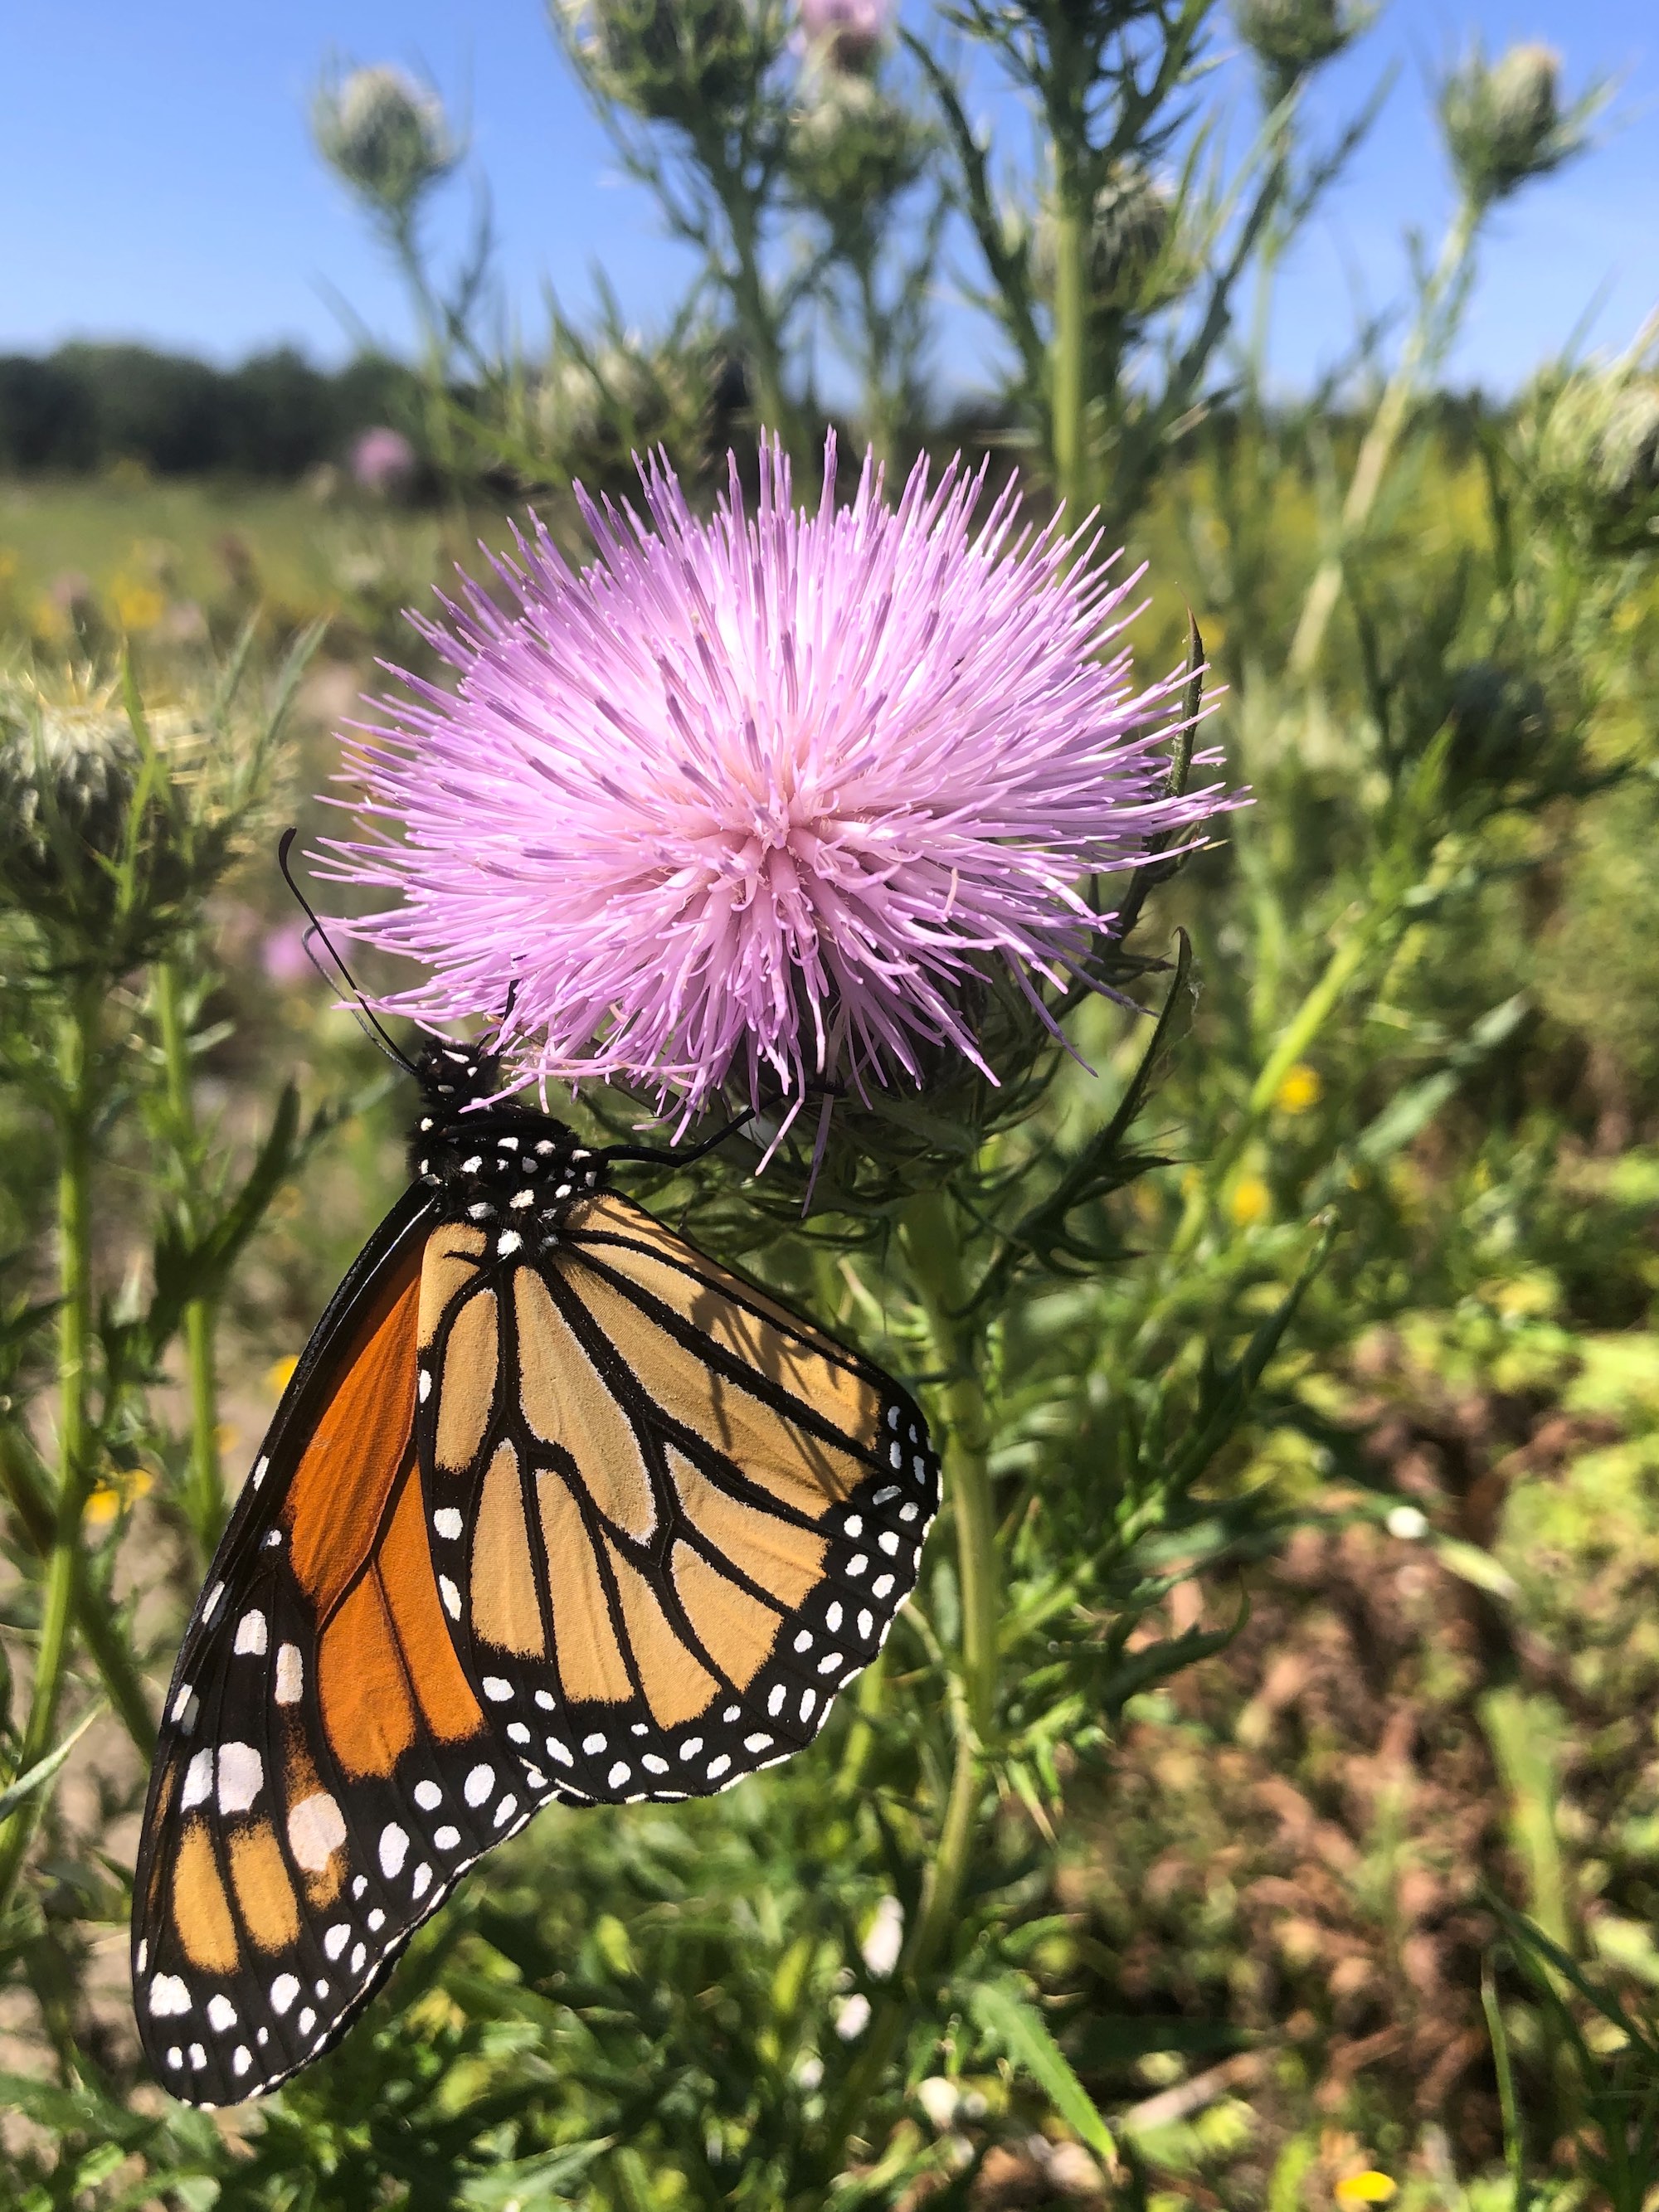 Monarch butterfly on Field Thistle in UW Arboretum Curtis Prairie in Madison, Wisconsin on August 20, 2020.